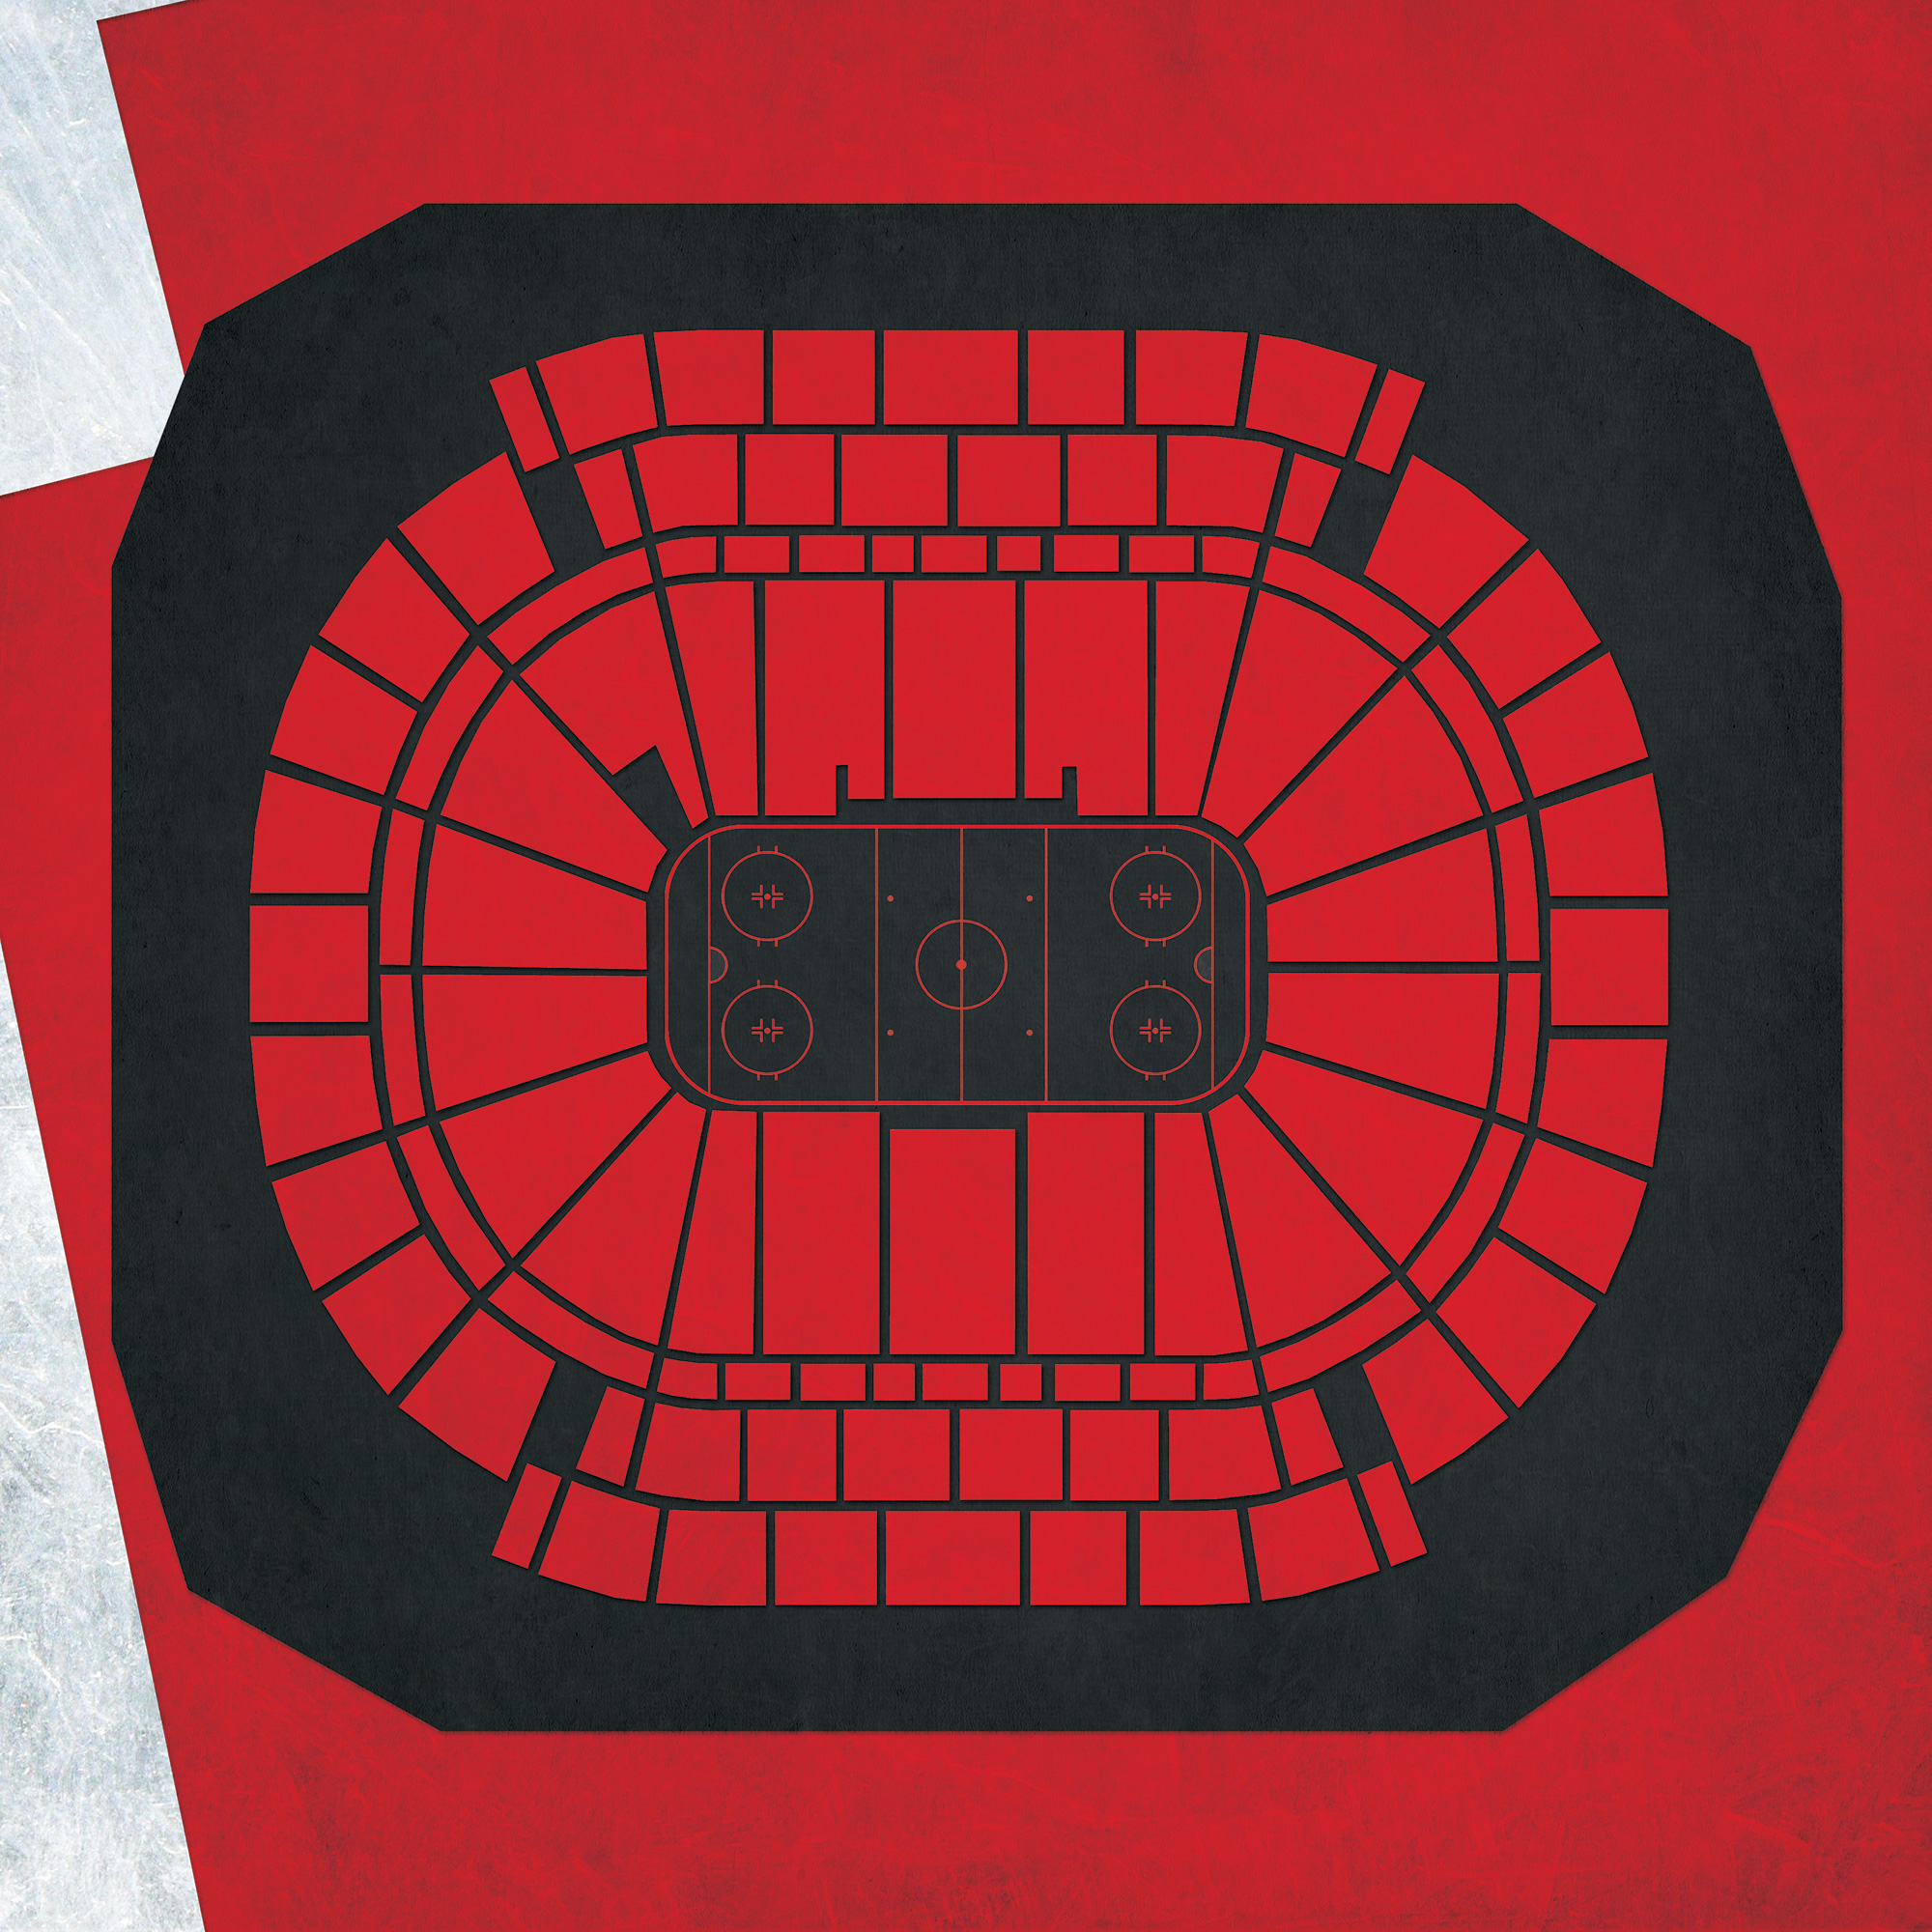 Prudential Center Seating Chart & Map